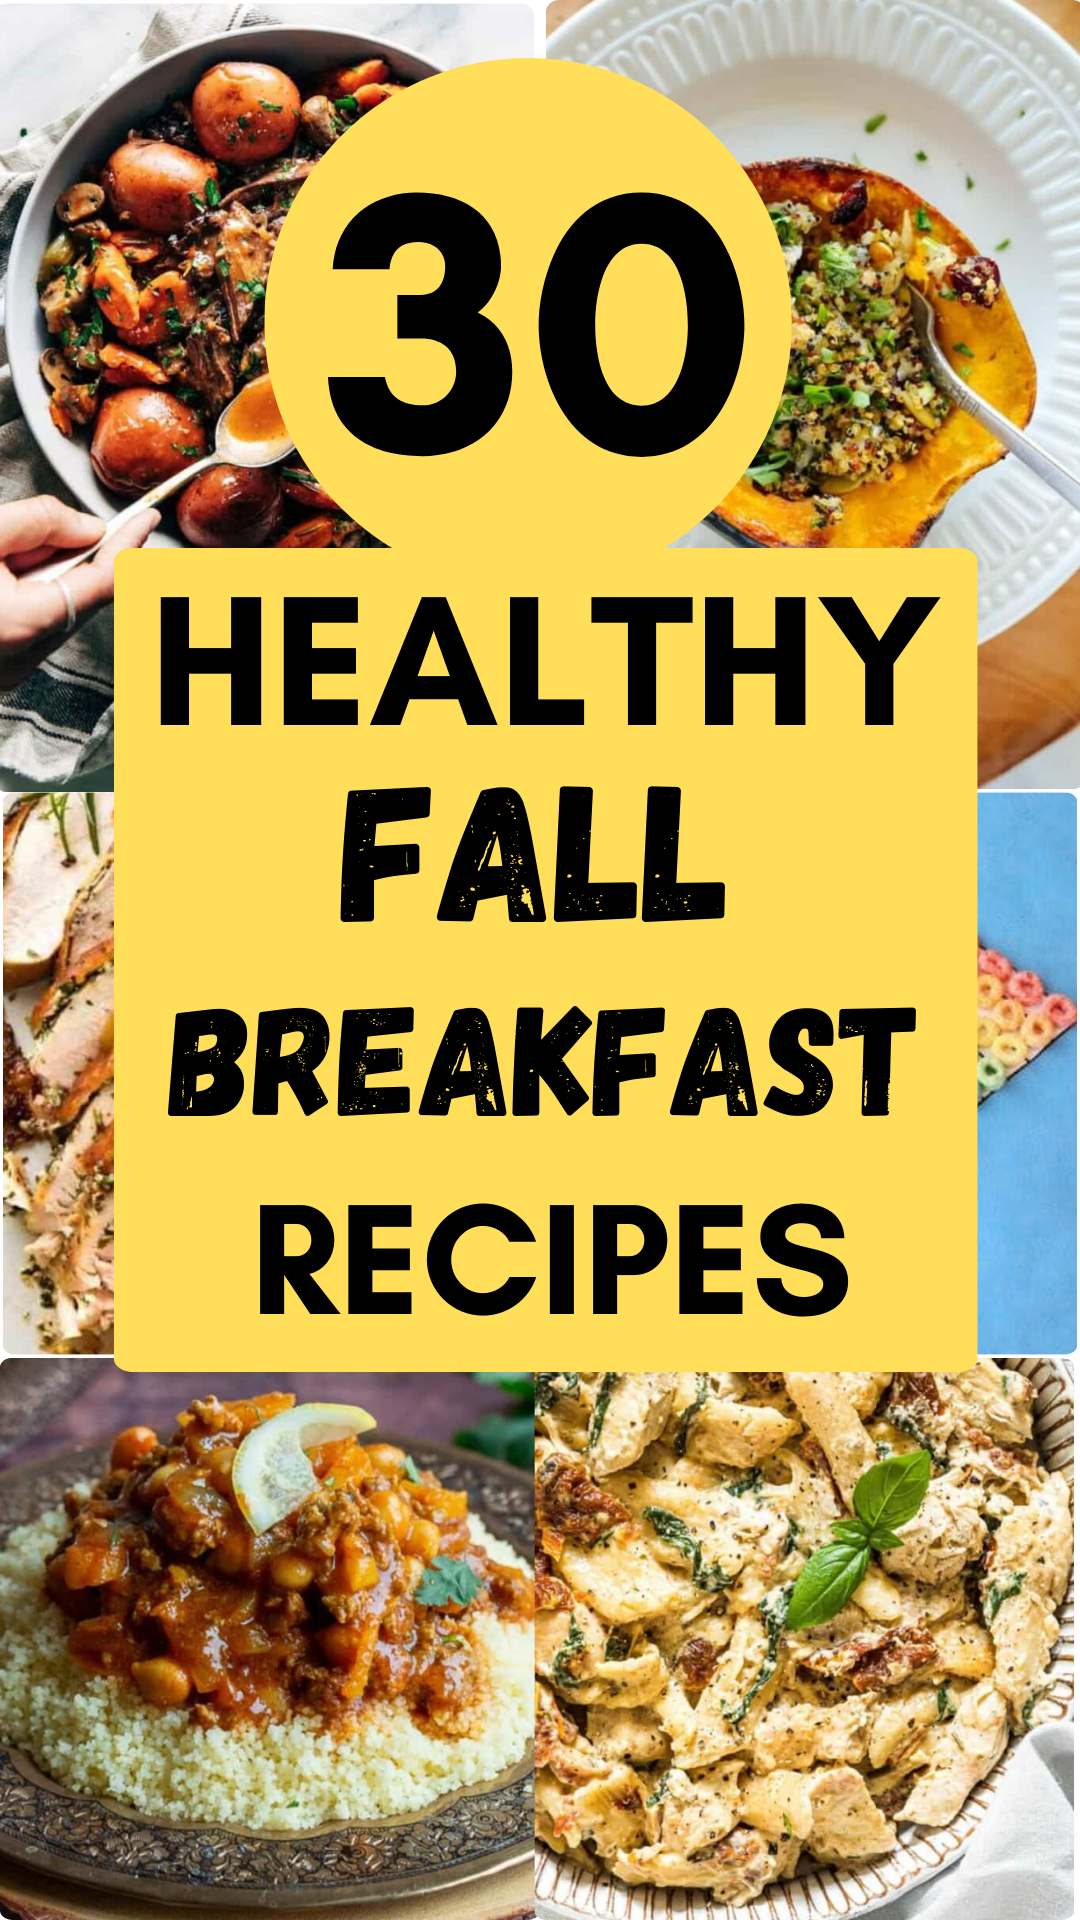 Delicious, enjoyable, speedy, simple autumn morning meal suggestions for a large group